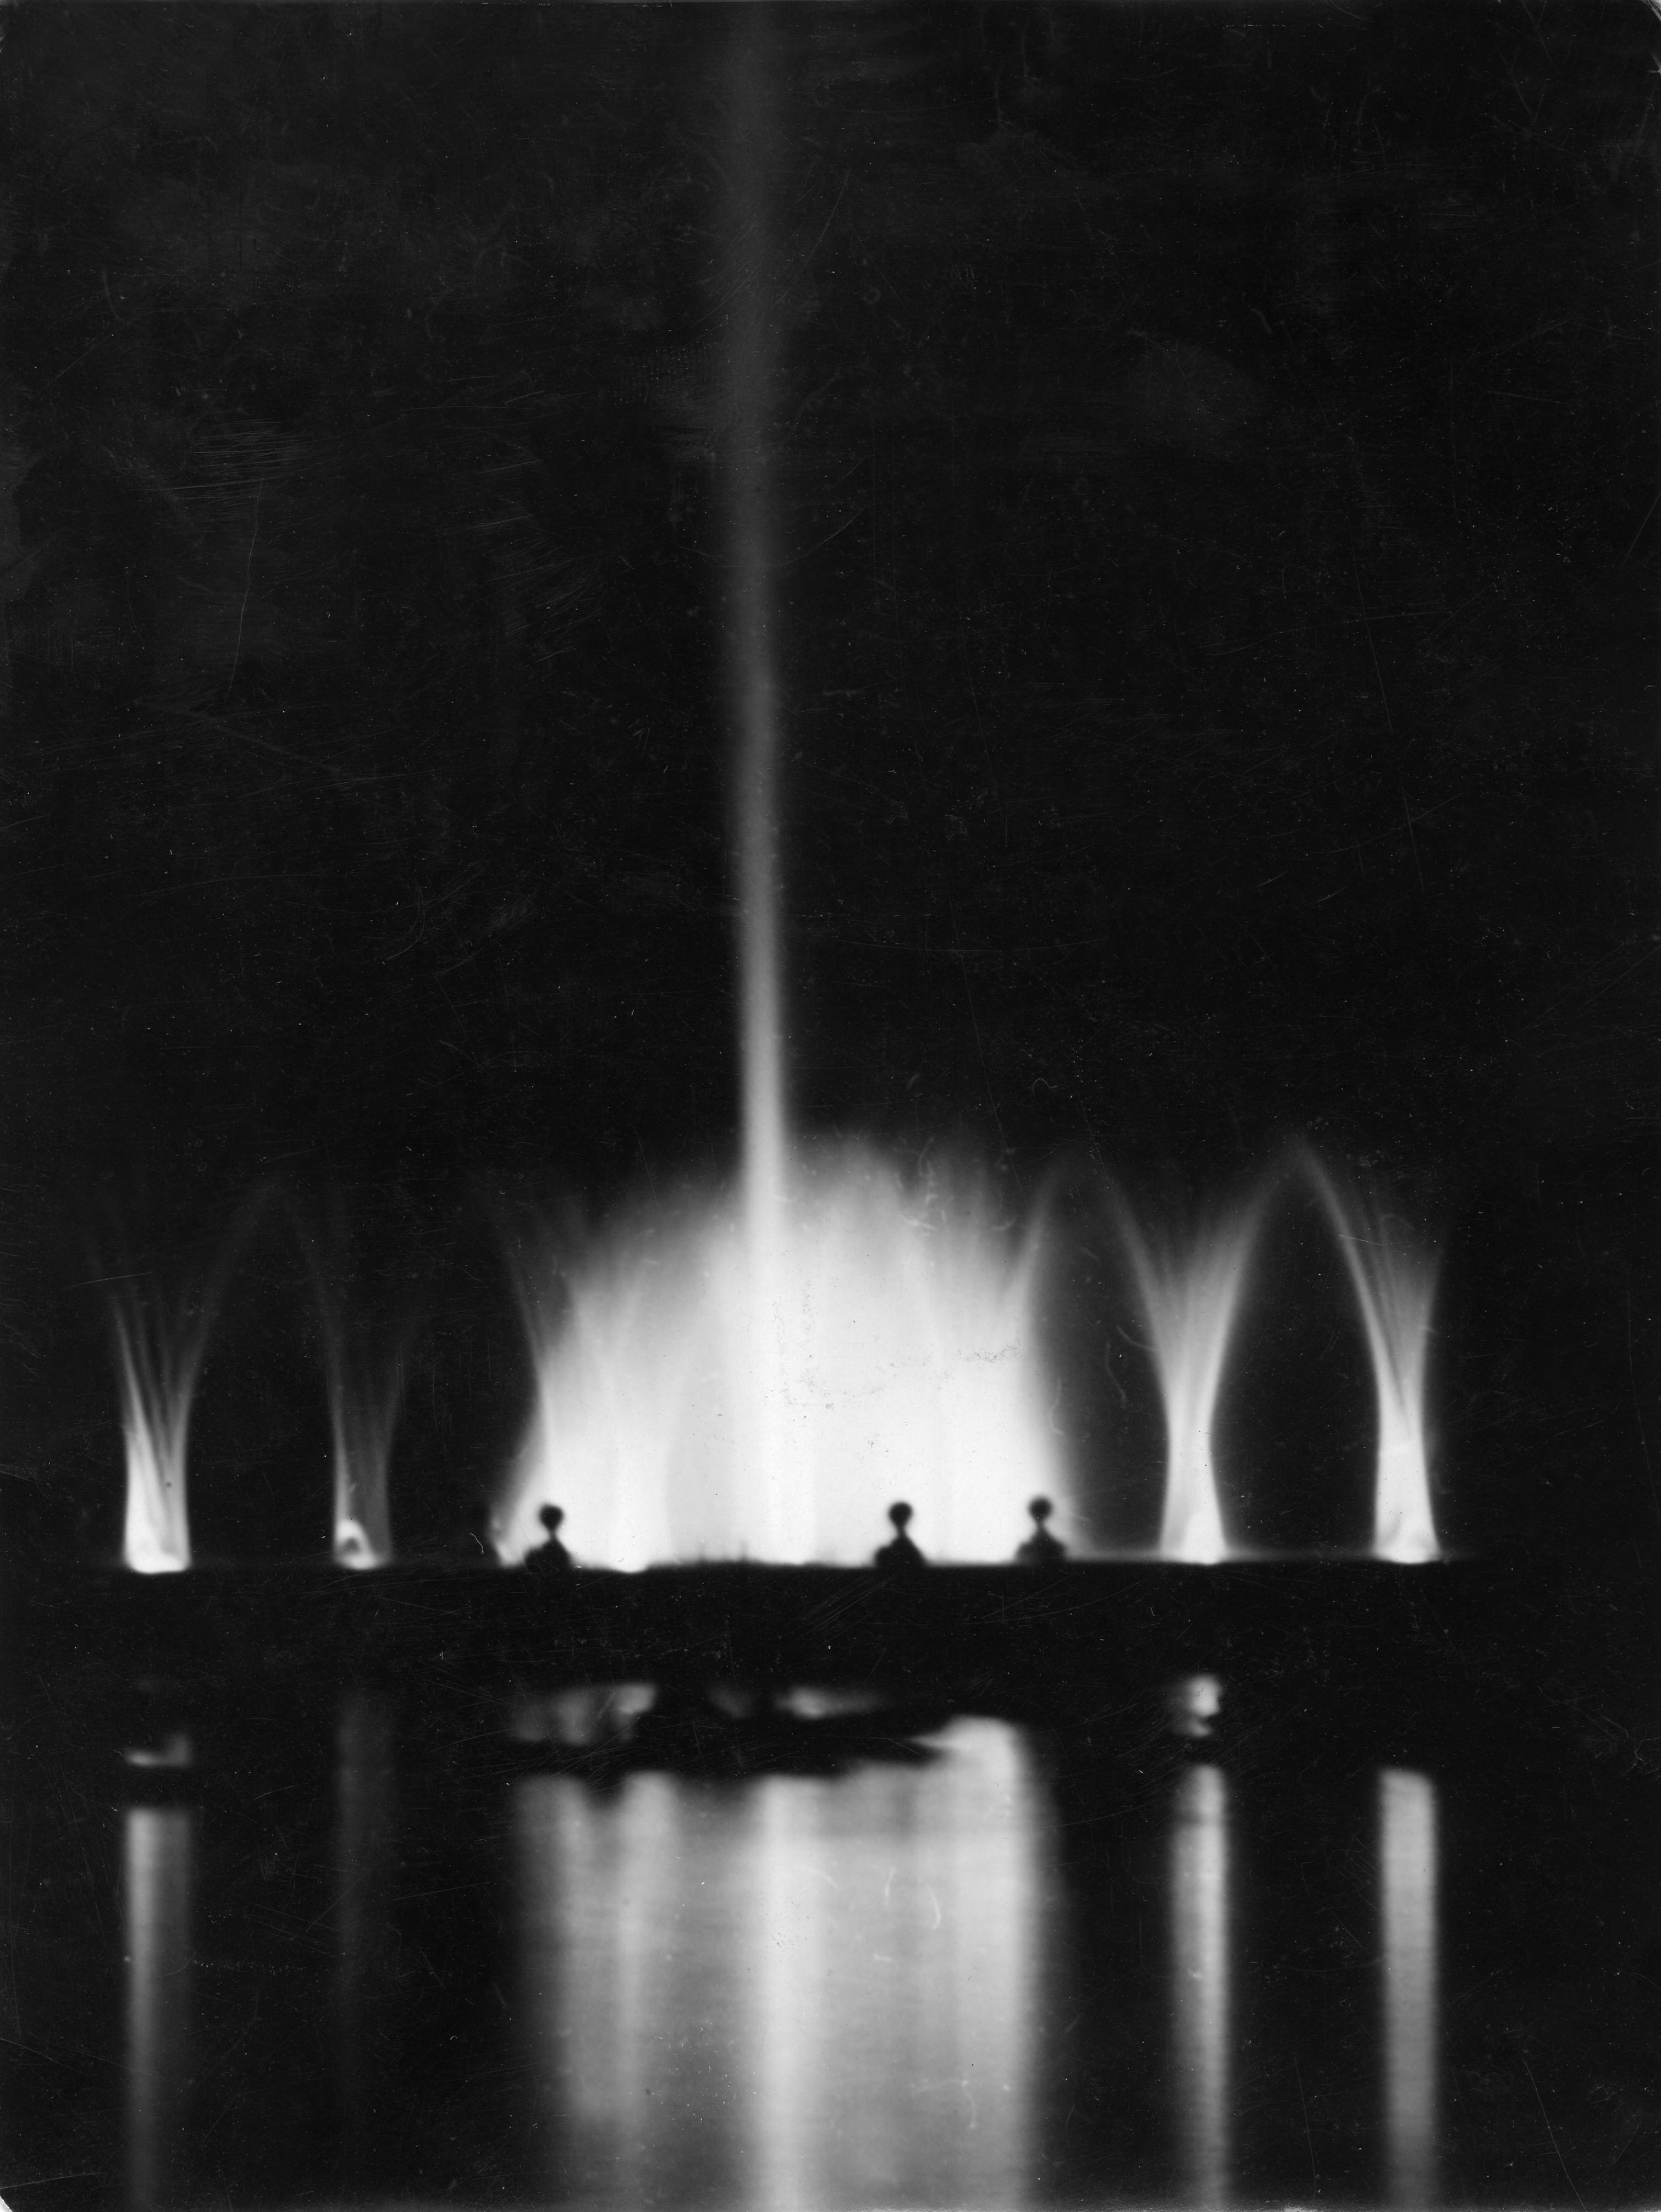 Photo of fountains at Denver's City Park, illuminated in the nighttime darkness. There are two smaller sprays up into the air on each side of a larger cluster of water sprays, with one tall burst of water in the center. The water glows white, and the reflection of the illuminated fountain sprays are visible in the perfectly still water of the lake in the foreground.